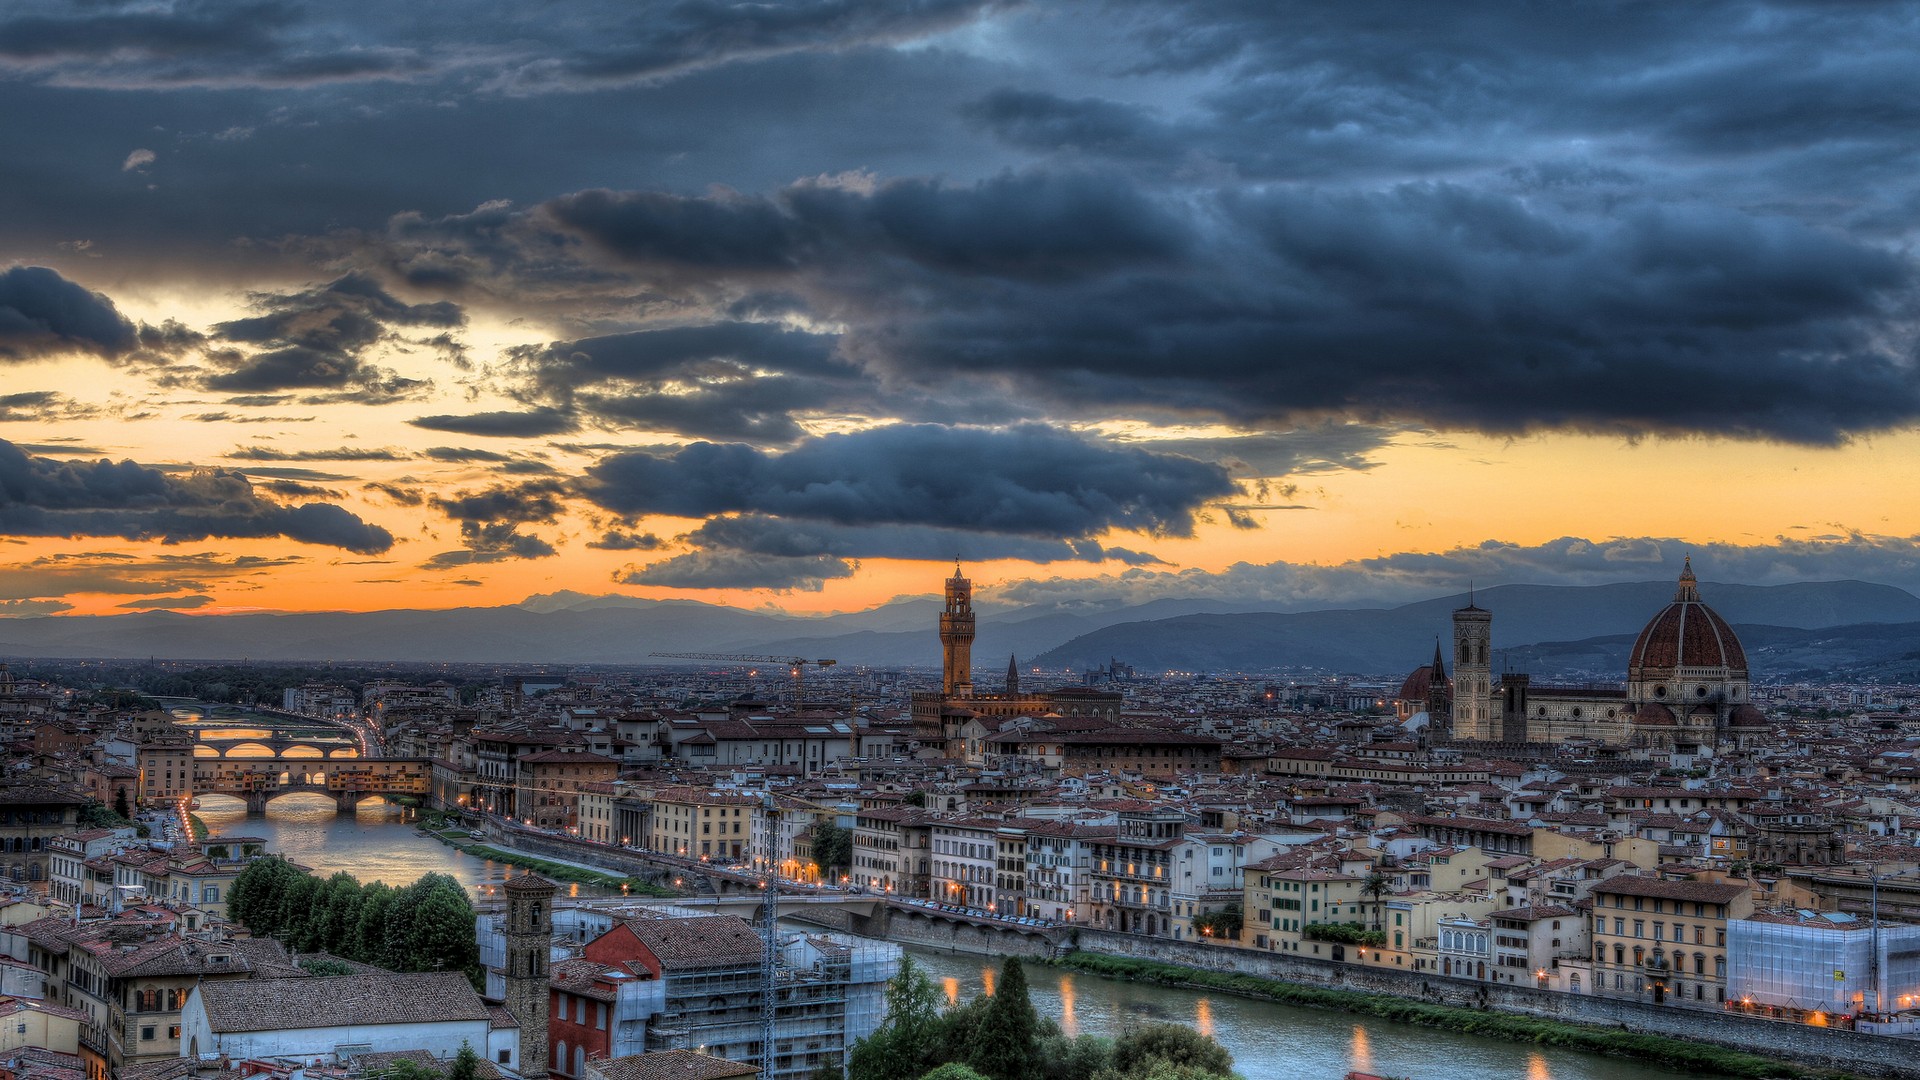 Florence Italy City Cityscape Architecture Gothic Architecture River Sunset Clouds 1920x1080